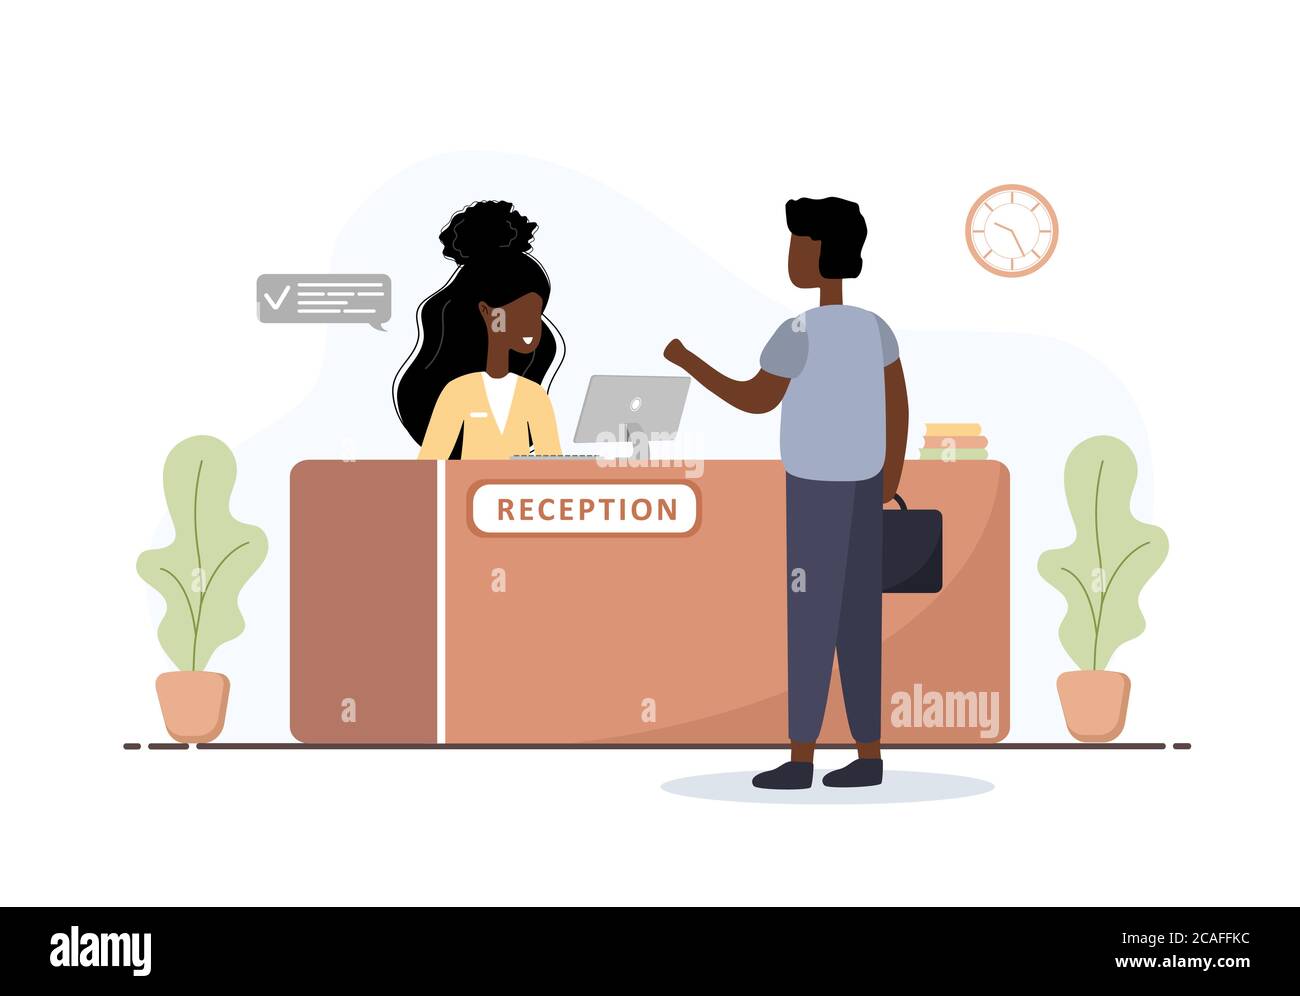 Reception interior. African woman receptionist and man with briefcase at reception desk. Hotel booking, clinic, airport registration, bank or office Stock Vector